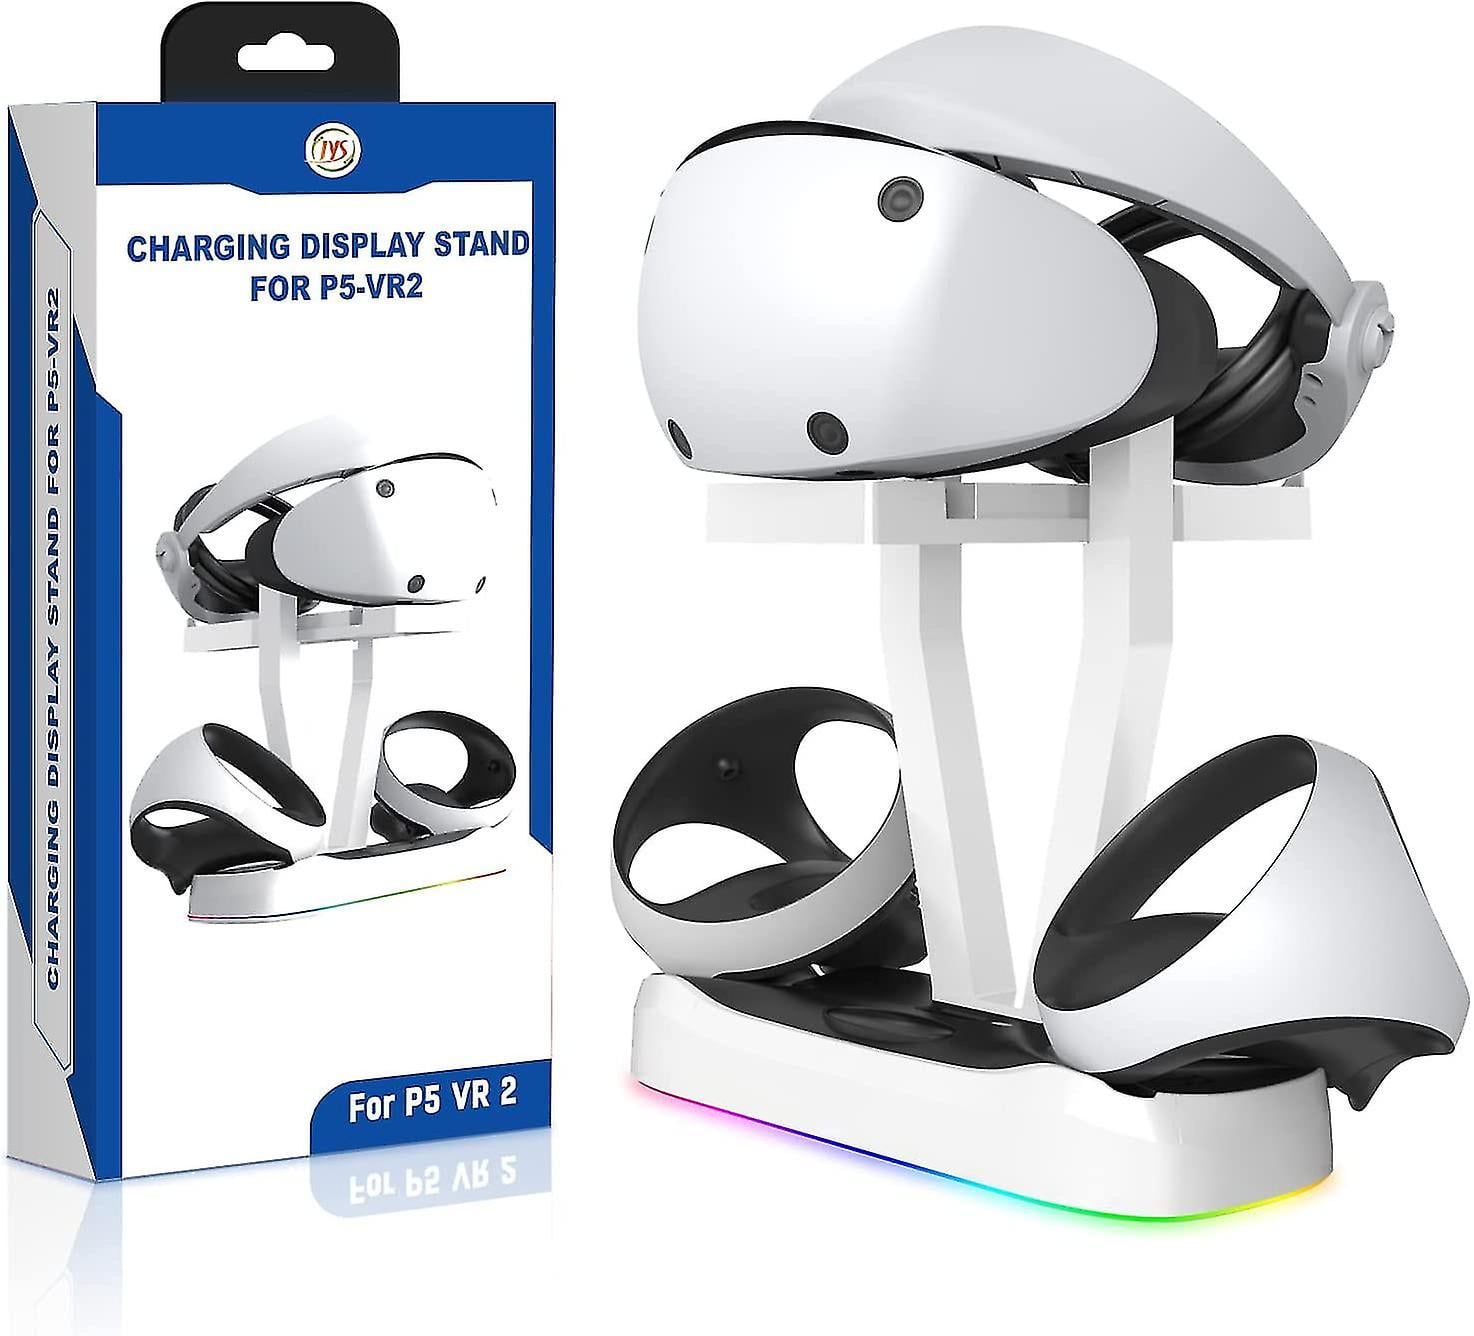 Dropship PSVR2 Controller Charging Dock With LED Light, VR Stand